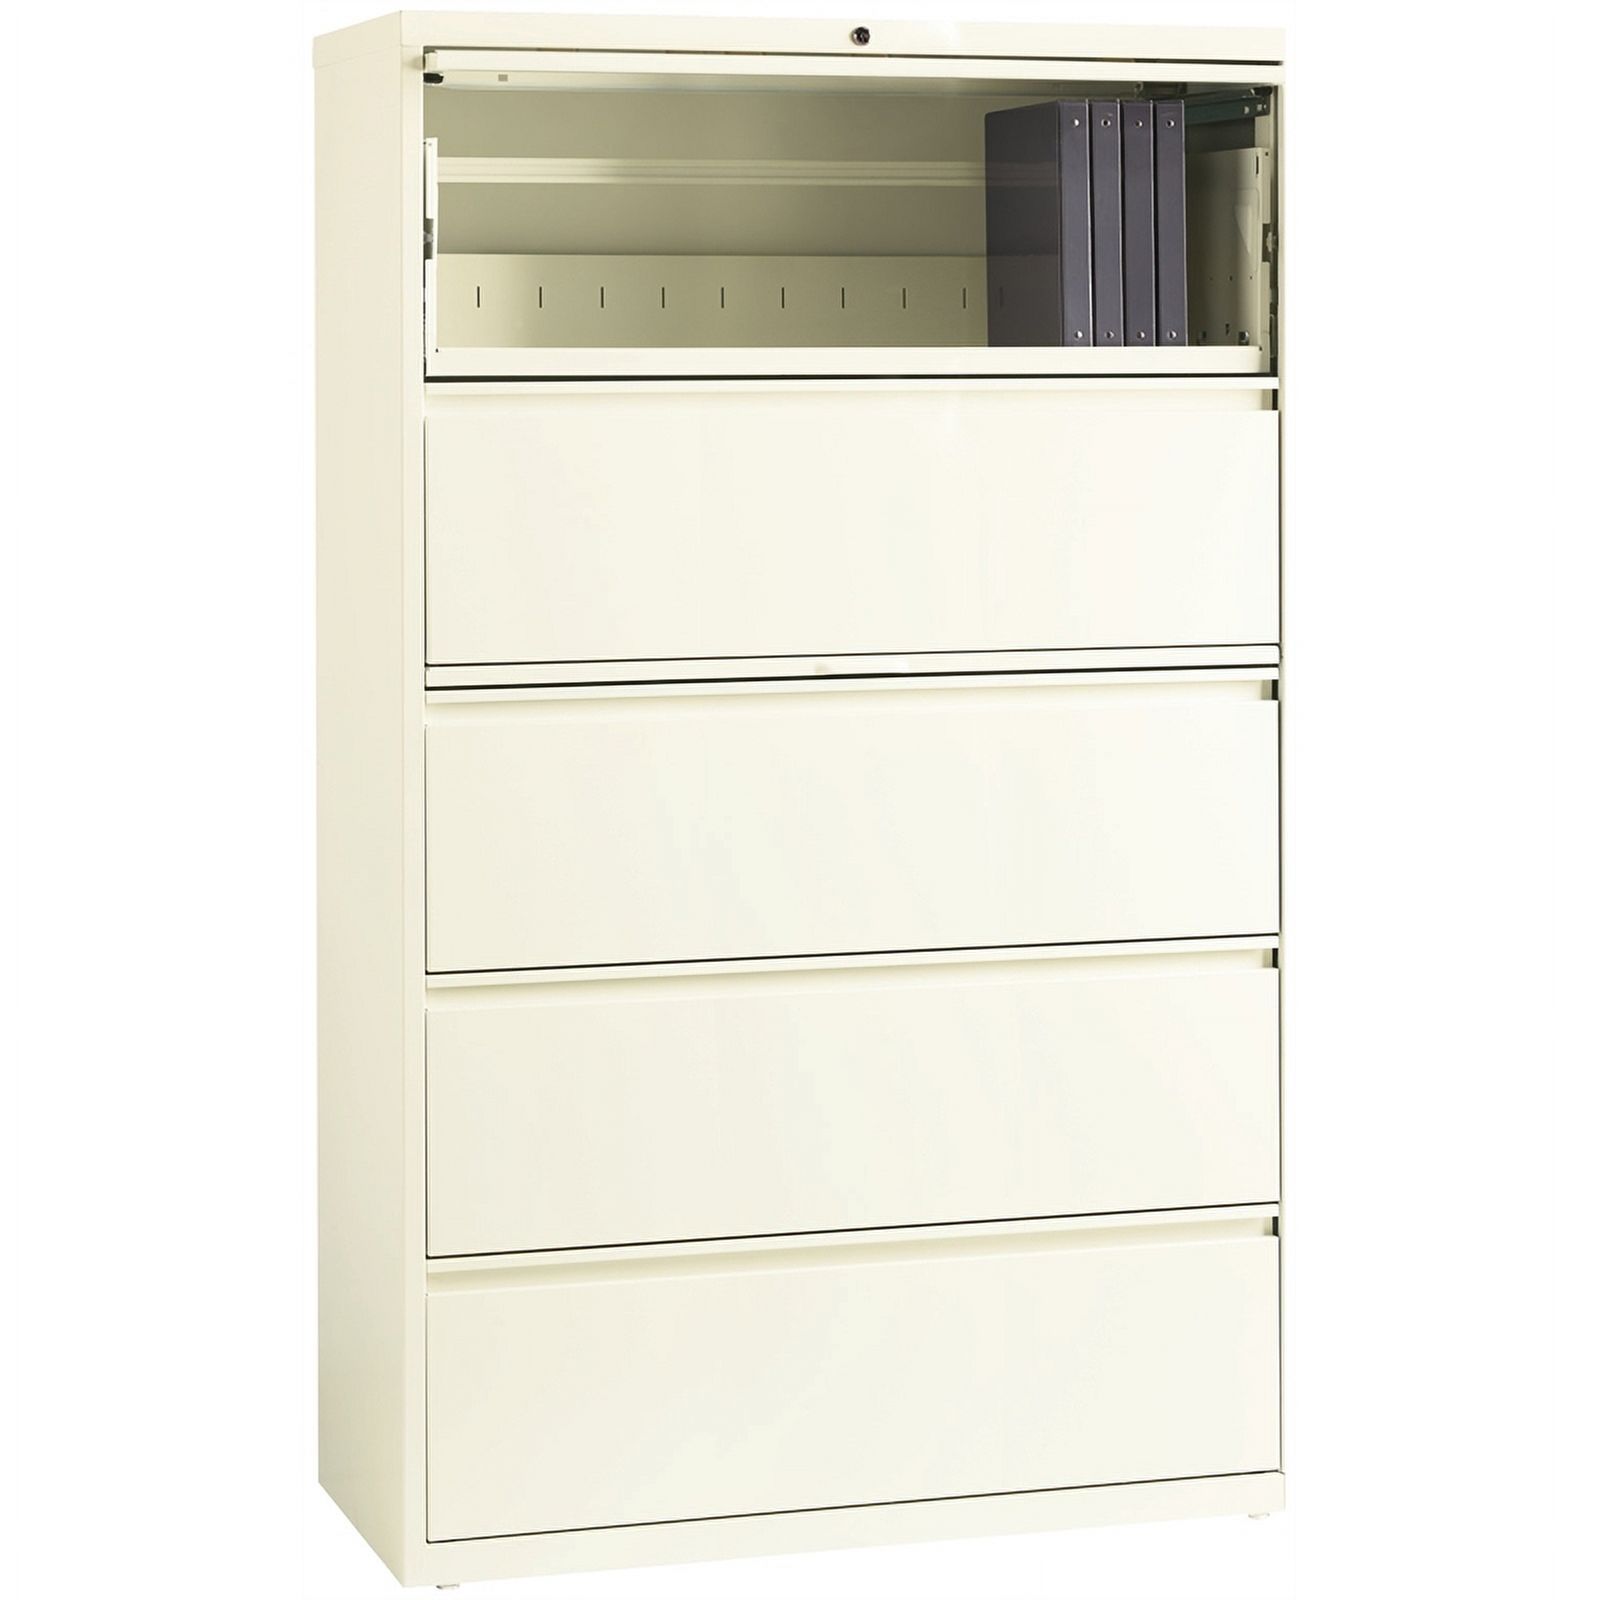 Scranton & Co 42" 5-Drawer Contemporary Metal Lateral File Cabinet in Off White - image 2 of 5